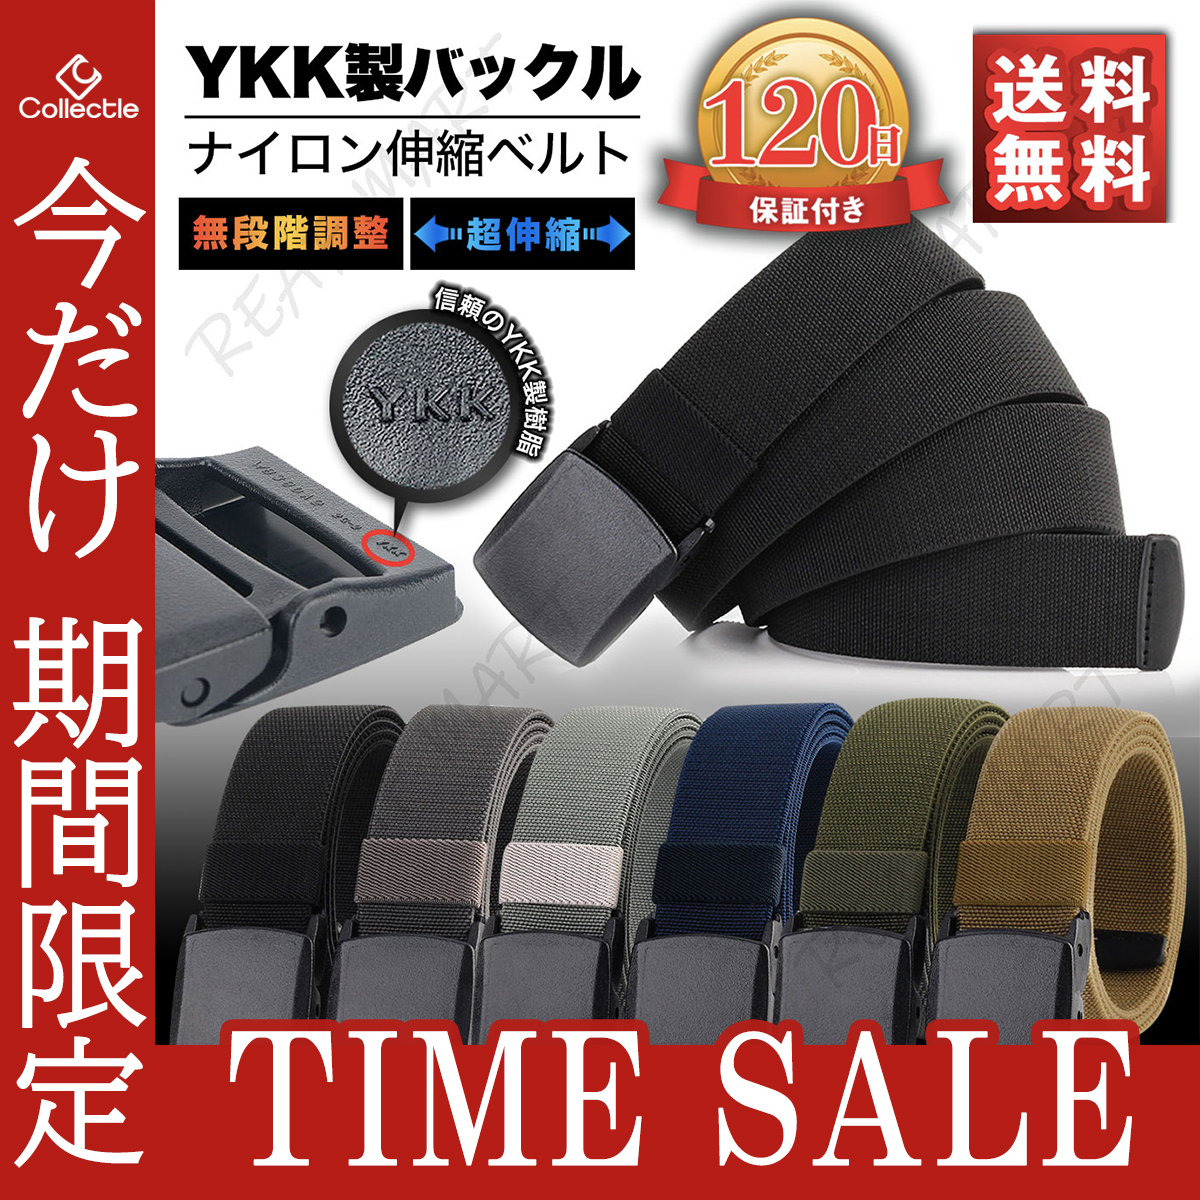 YKK made belt men's nylon belt metal unused high quality super light weight flexible belt nylon free size work clothes work for adjustment possible less -step hole none light weight 